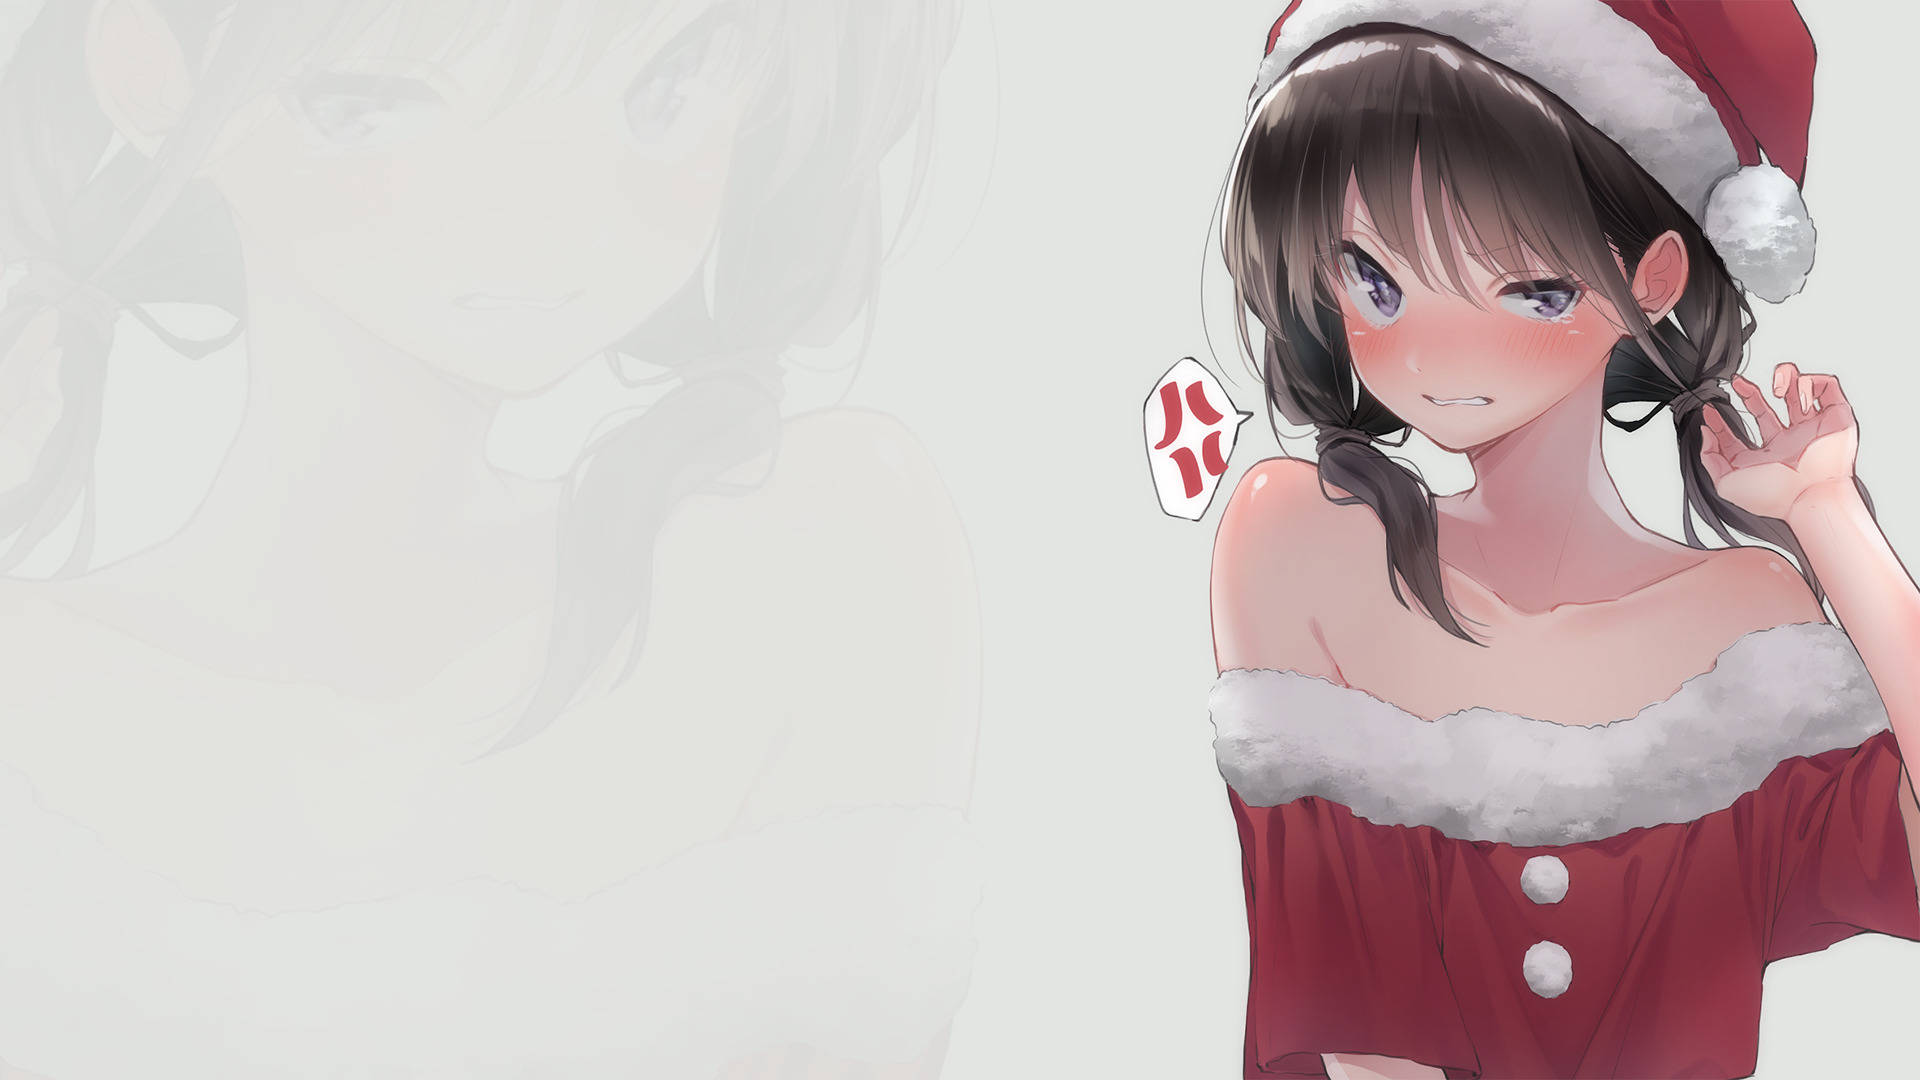 Frustrated Anime Girl Christmas Background Wallpaper